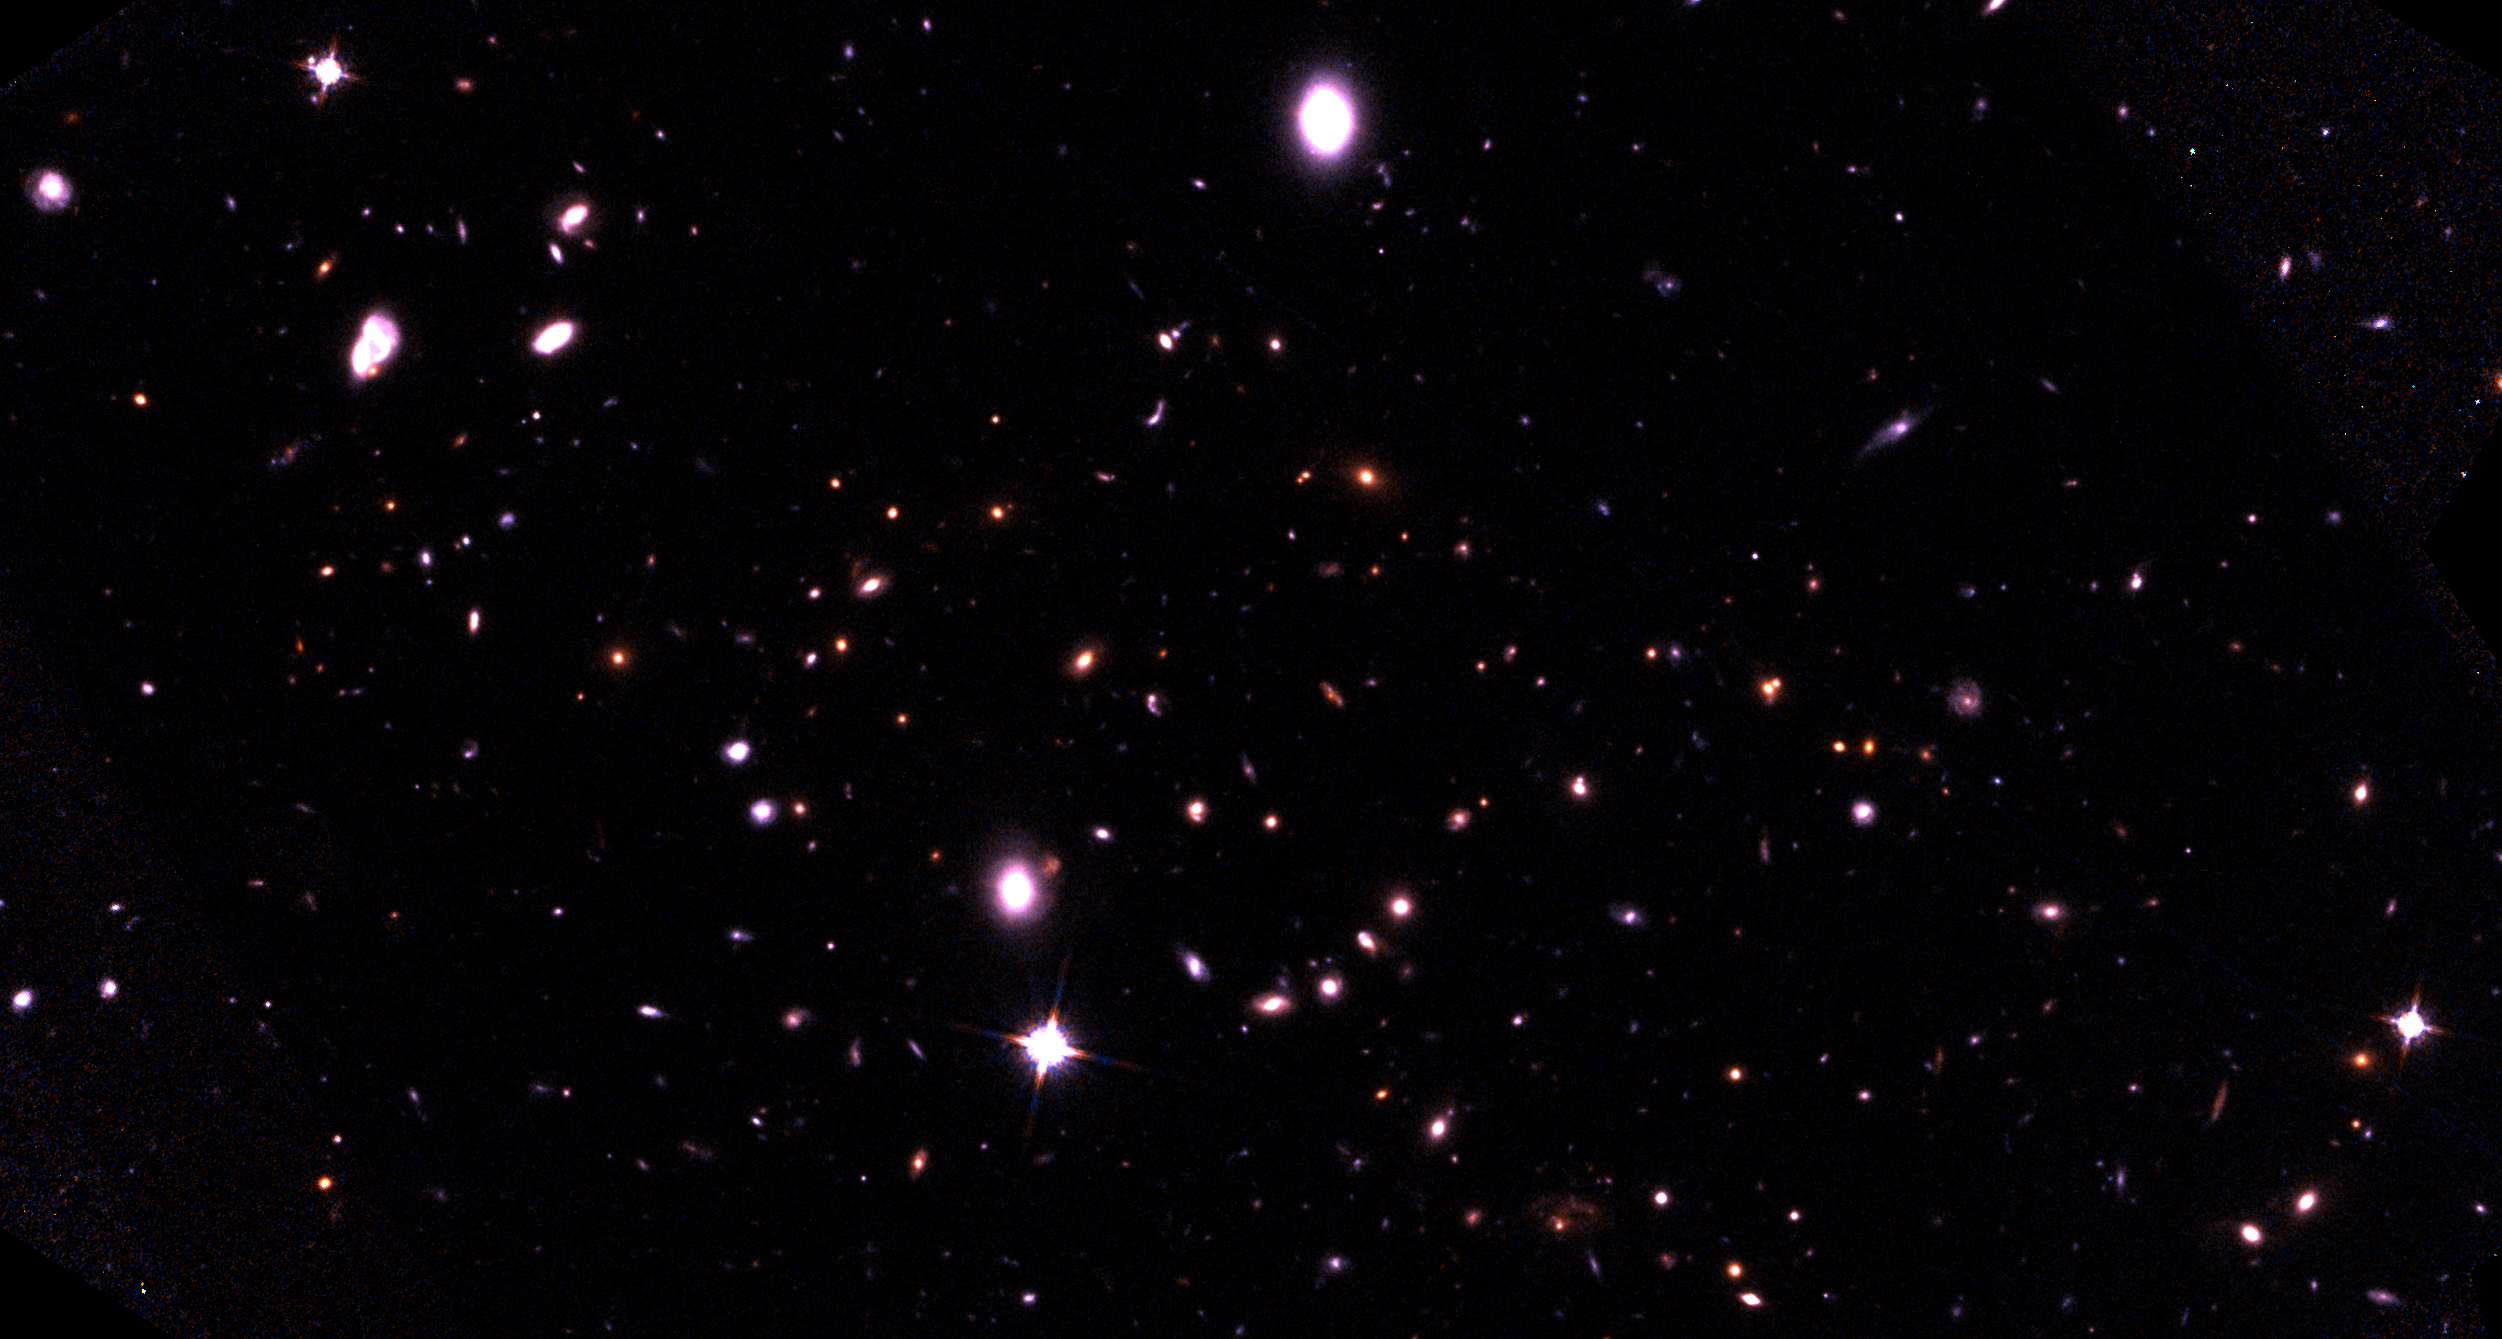 HST-based color image of the most distant cluster known